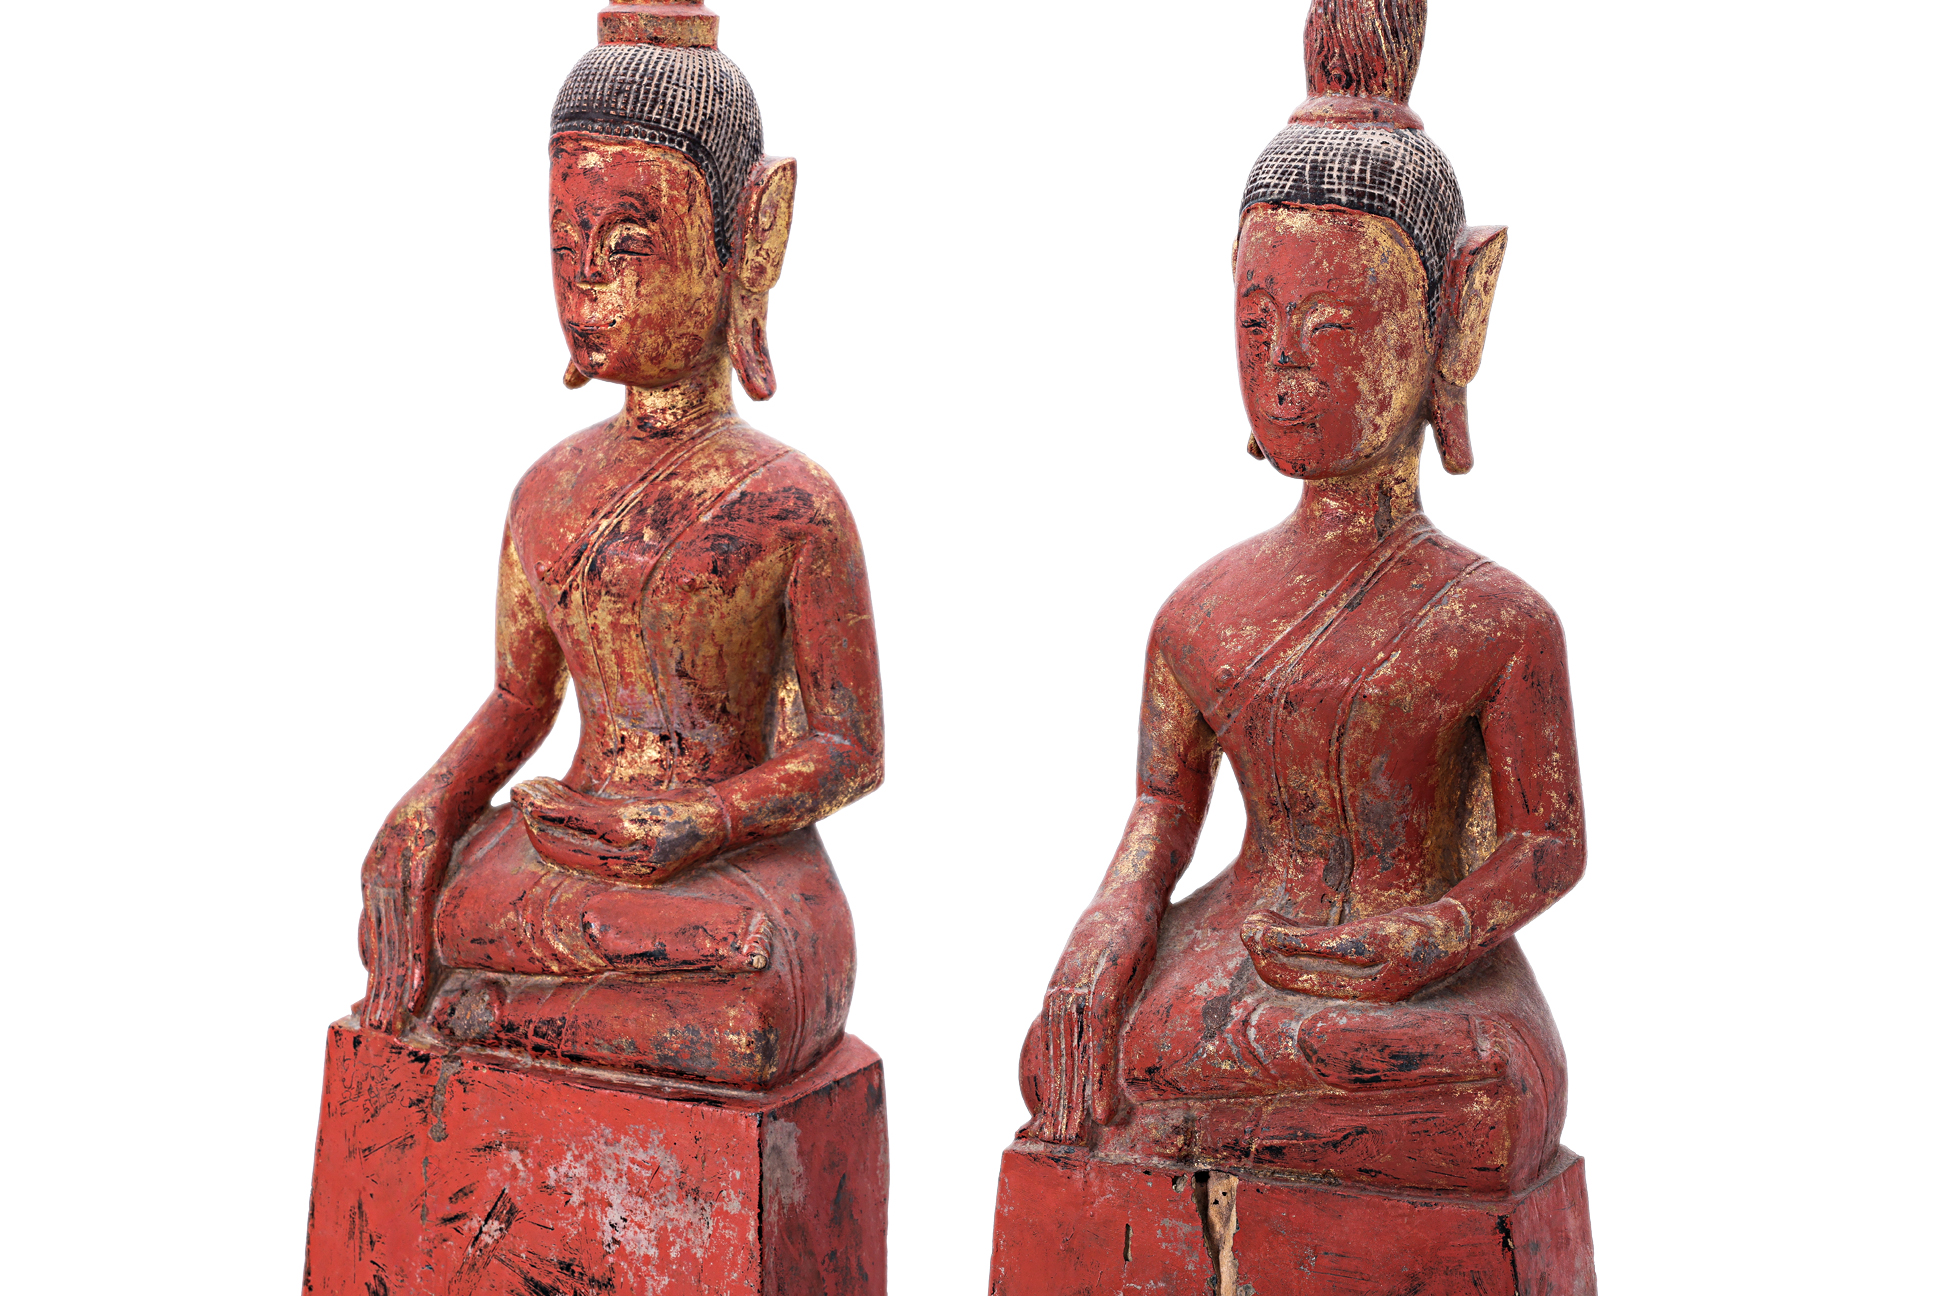 A PAIR OF LAOTIAN SEATED BUDDHA FIGURES - Image 2 of 3